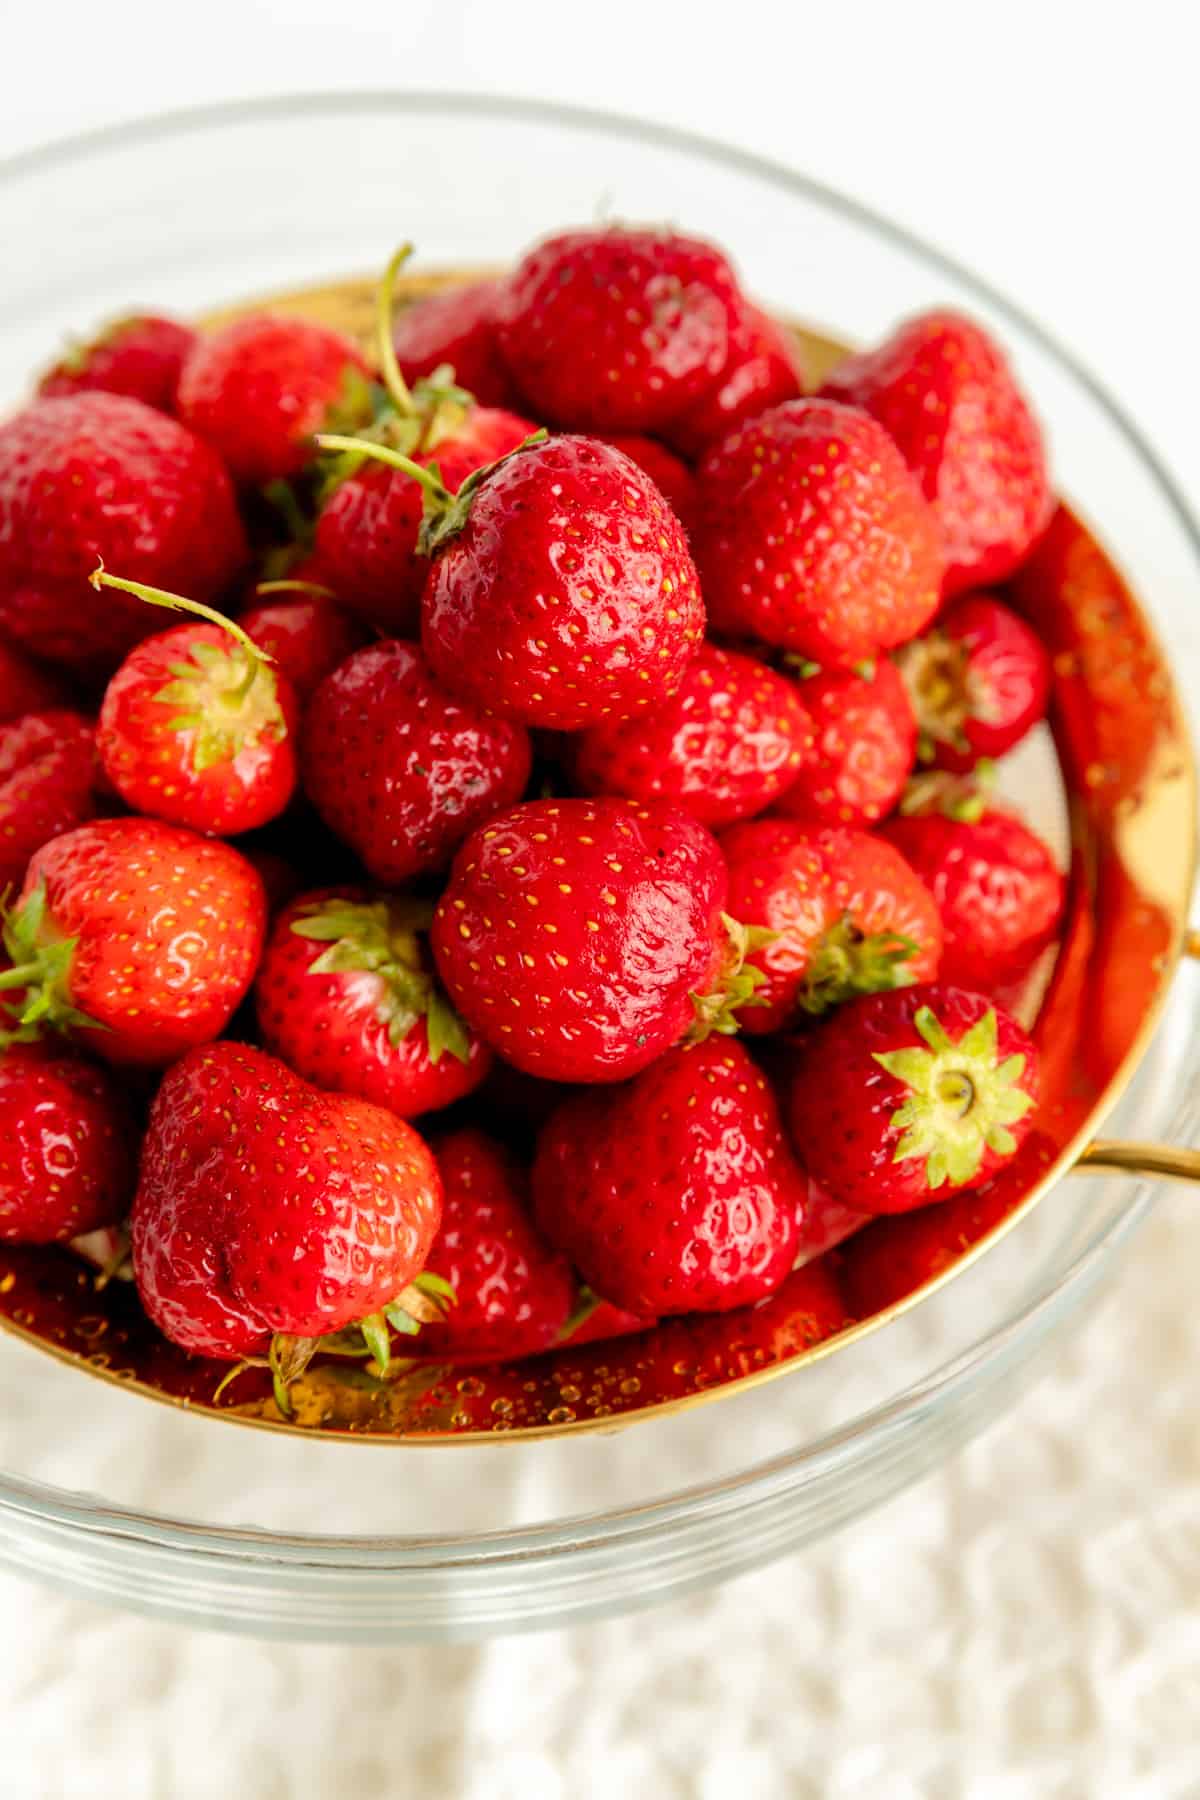 Fresh strawberries piled in a gold strainer over a glass bowl after being washed.